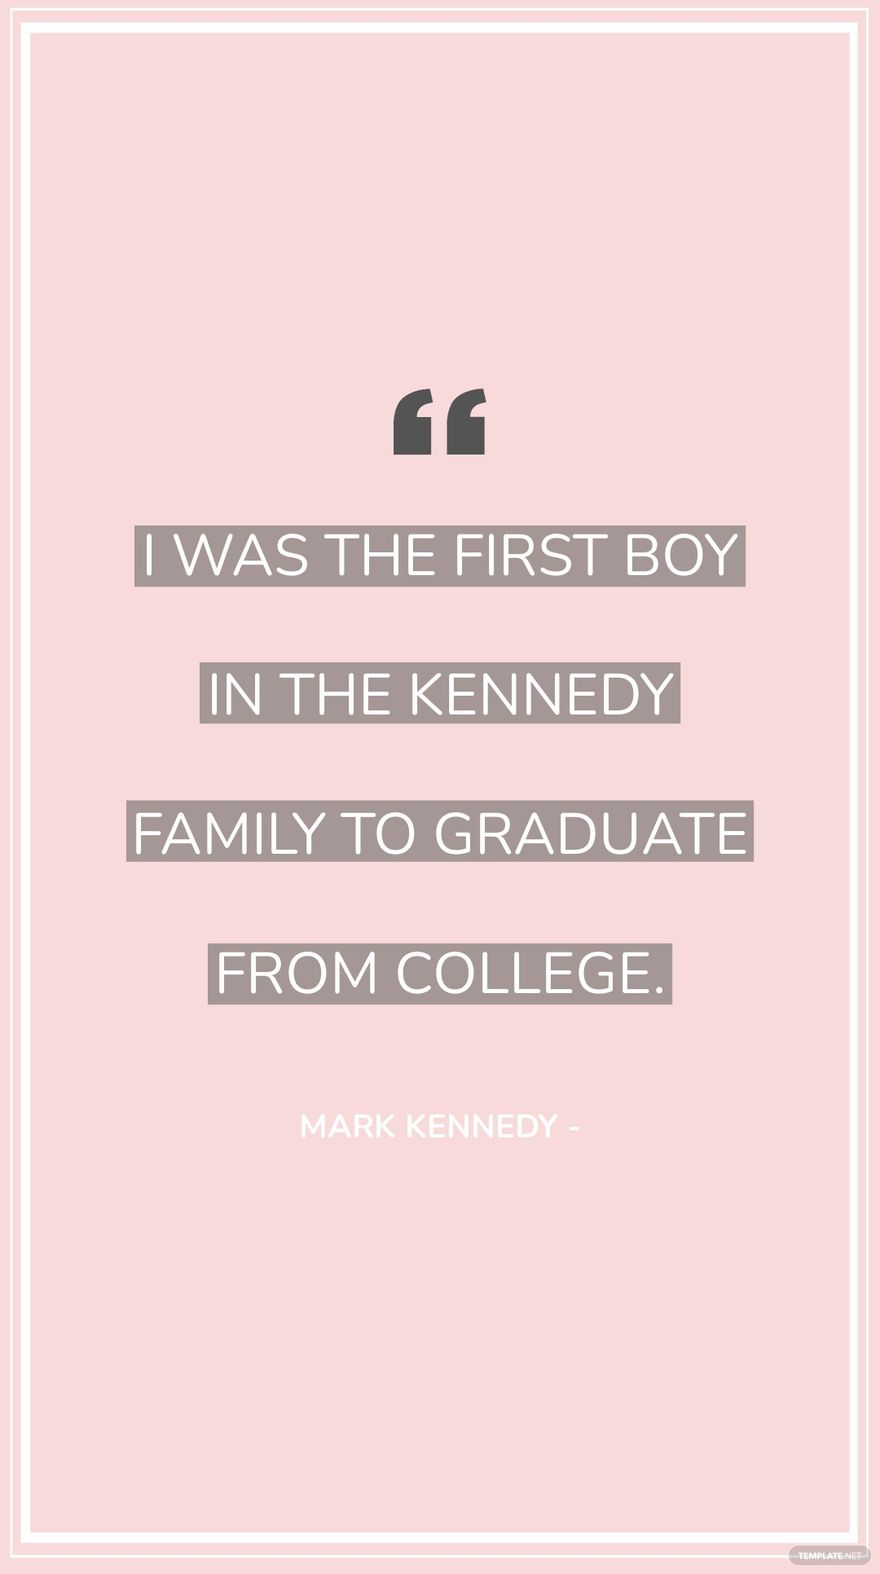 Mark Kennedy - I was the first boy in the Kennedy family to graduate from college.